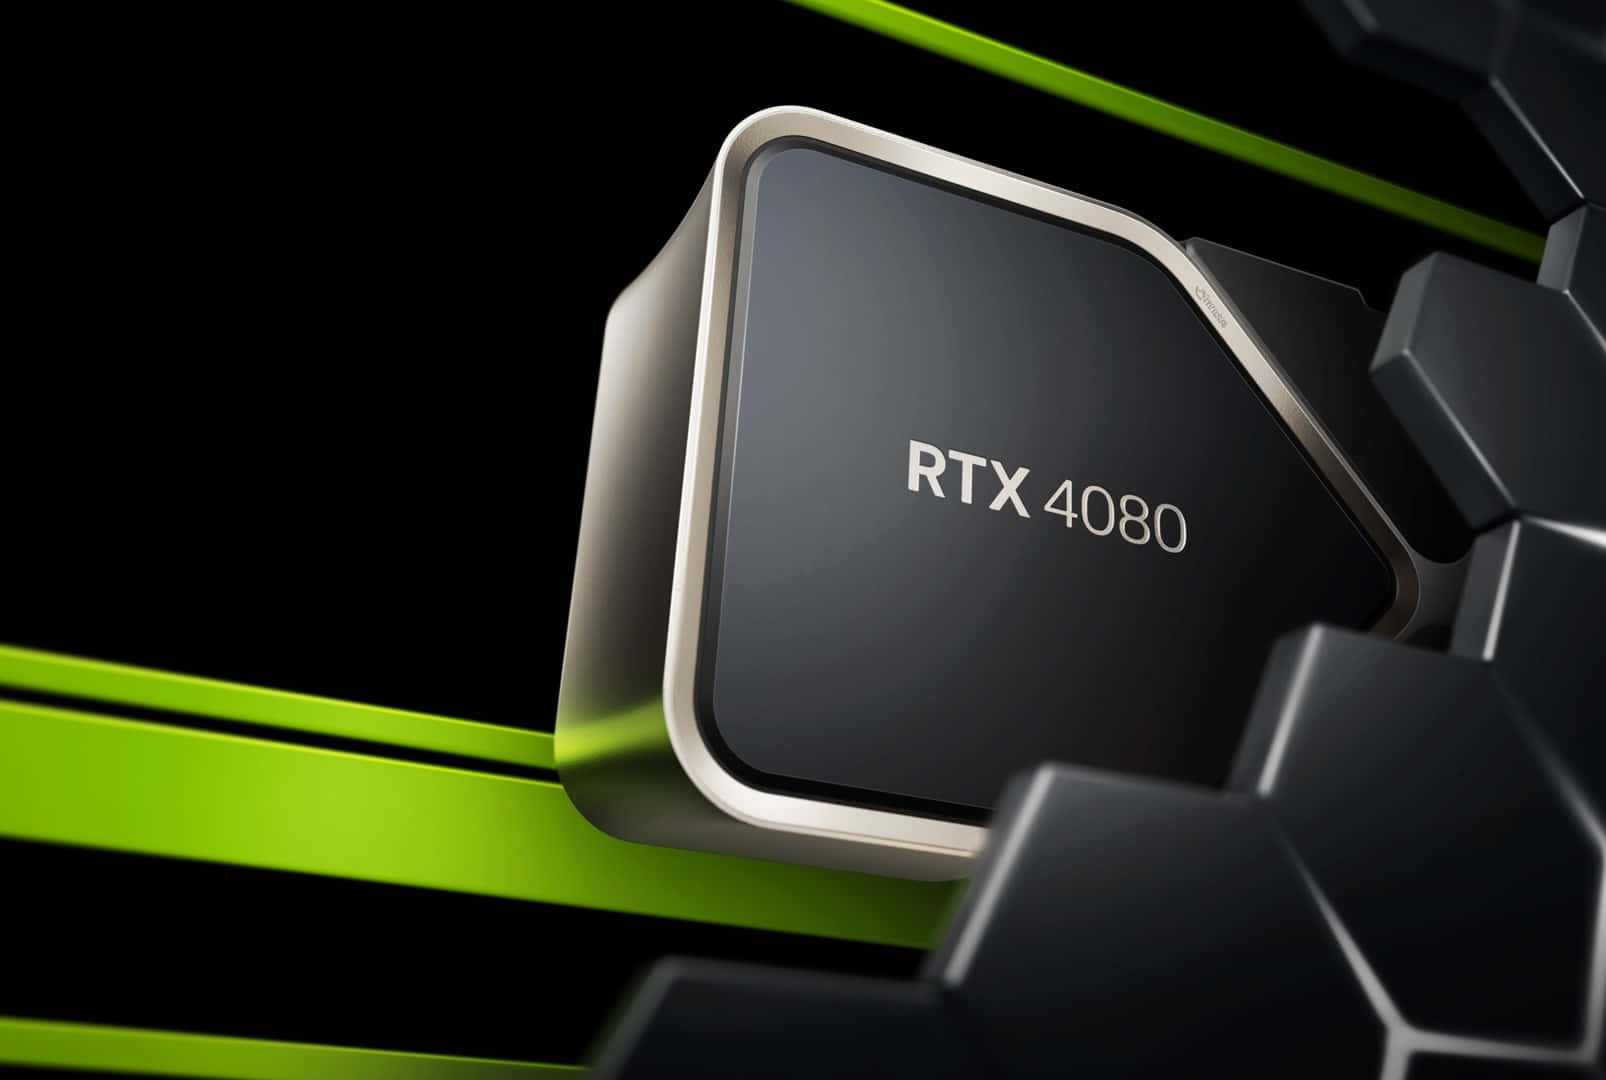 R T X4080 Graphics Card Promotional Image Wallpaper